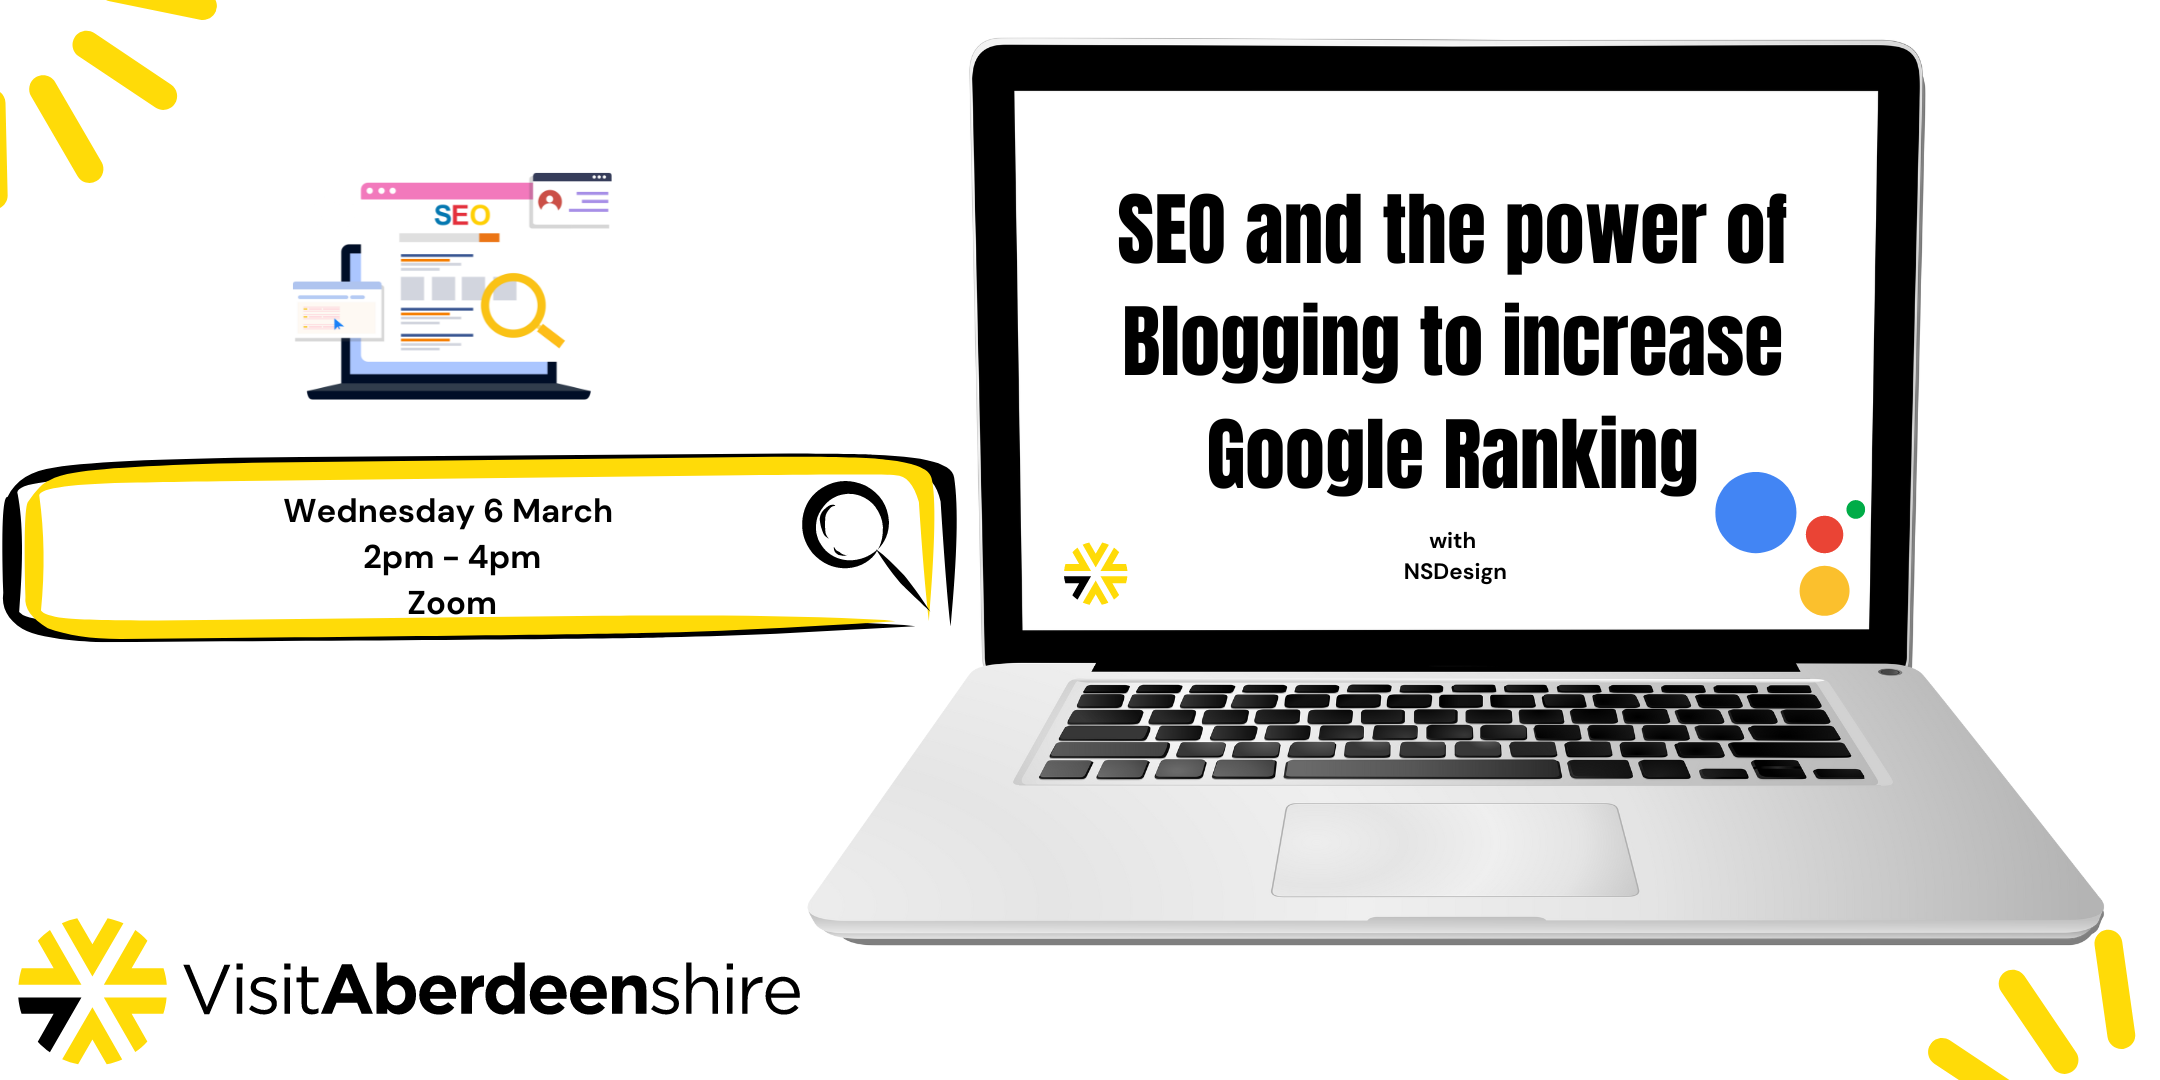 SEO and the power of Blogging to increase Google Ranking